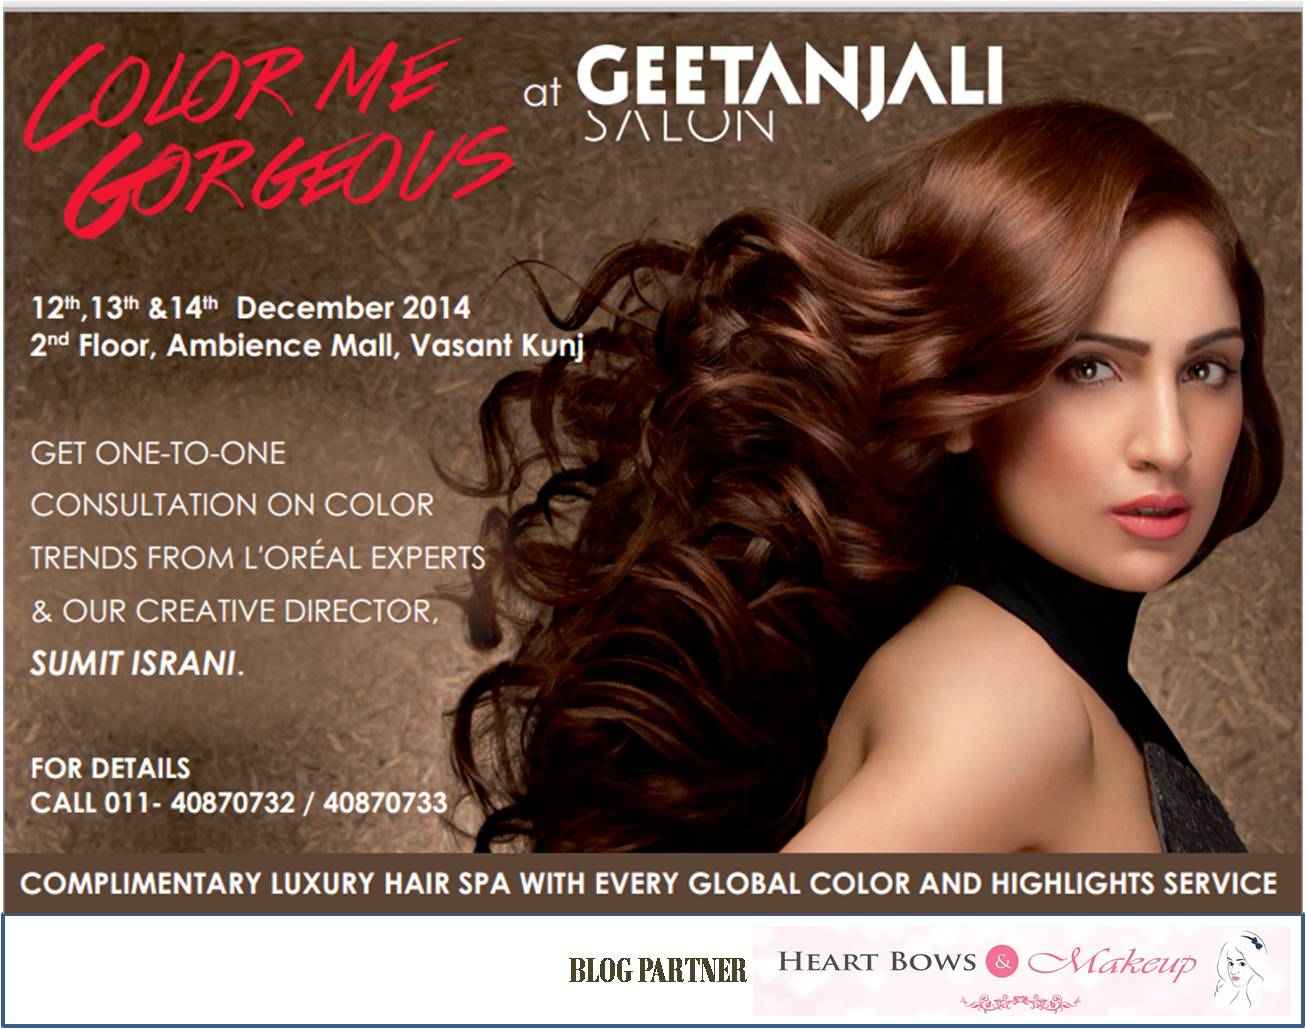 Win a Chance to Color Your Hair Gorgeous With Geetanjali Salon - Heart Bows  & Makeup